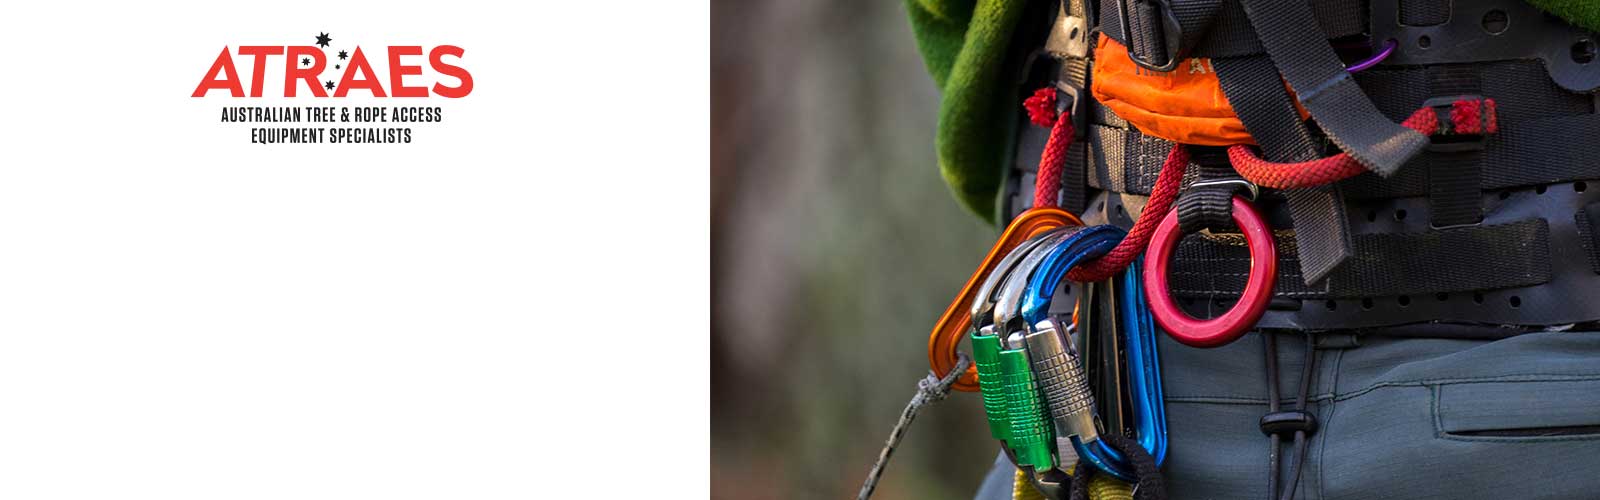 Arborist Climbing Gear: Your One-Stop Shop for Arborist, Rope Access, and Height Safety Equipment.